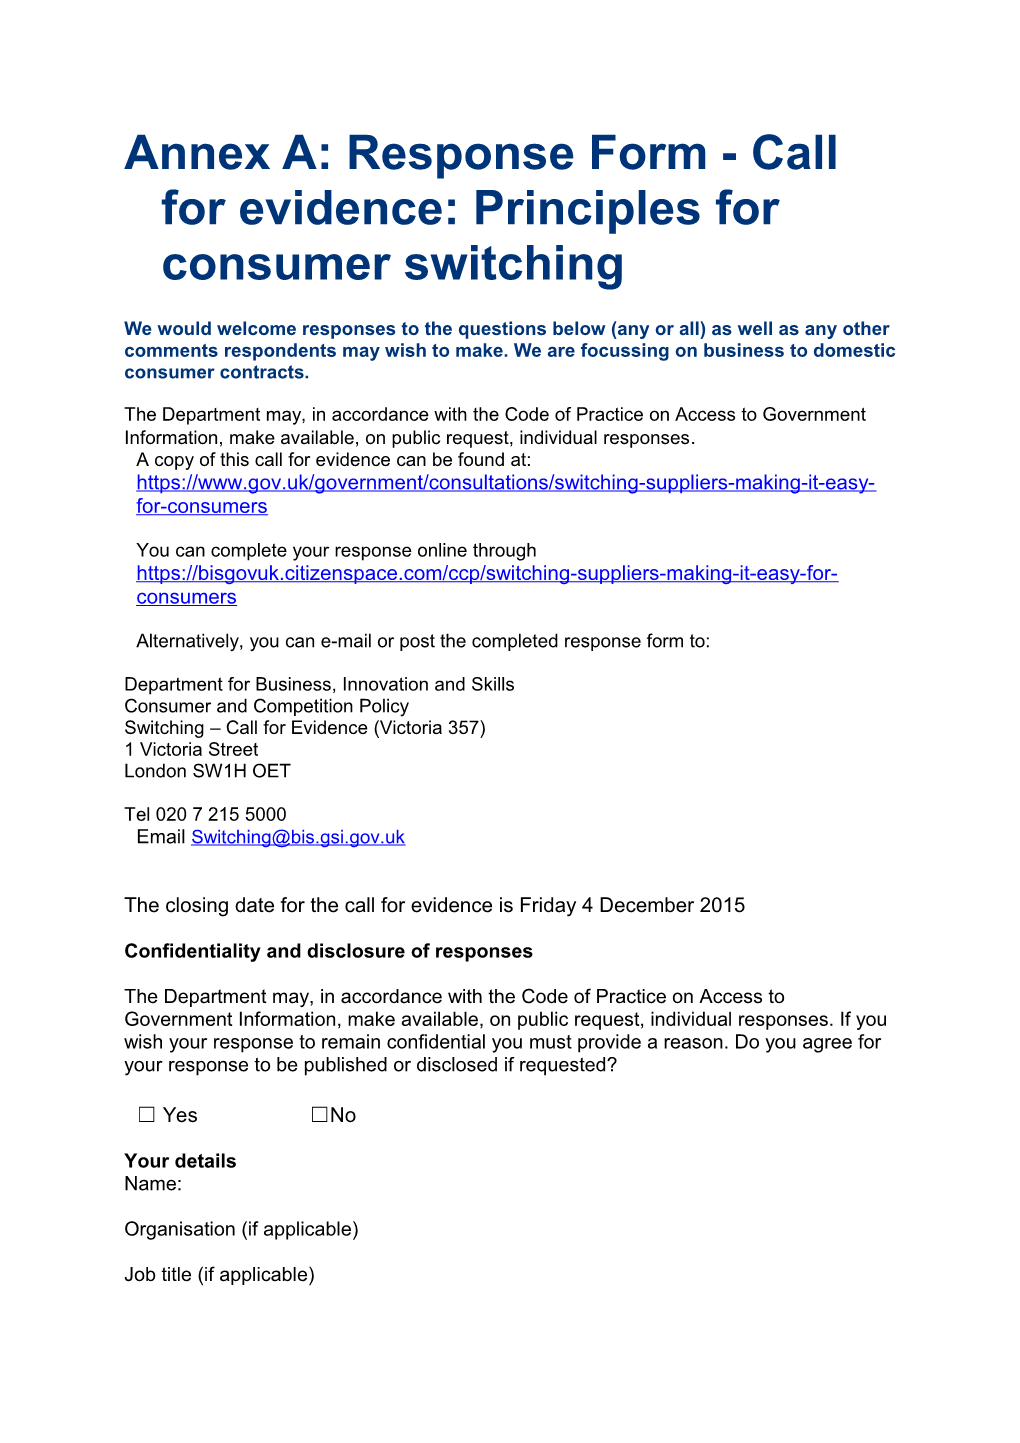 Annexa: Response Form - Call for Evidence: Principles for Consumer Switching